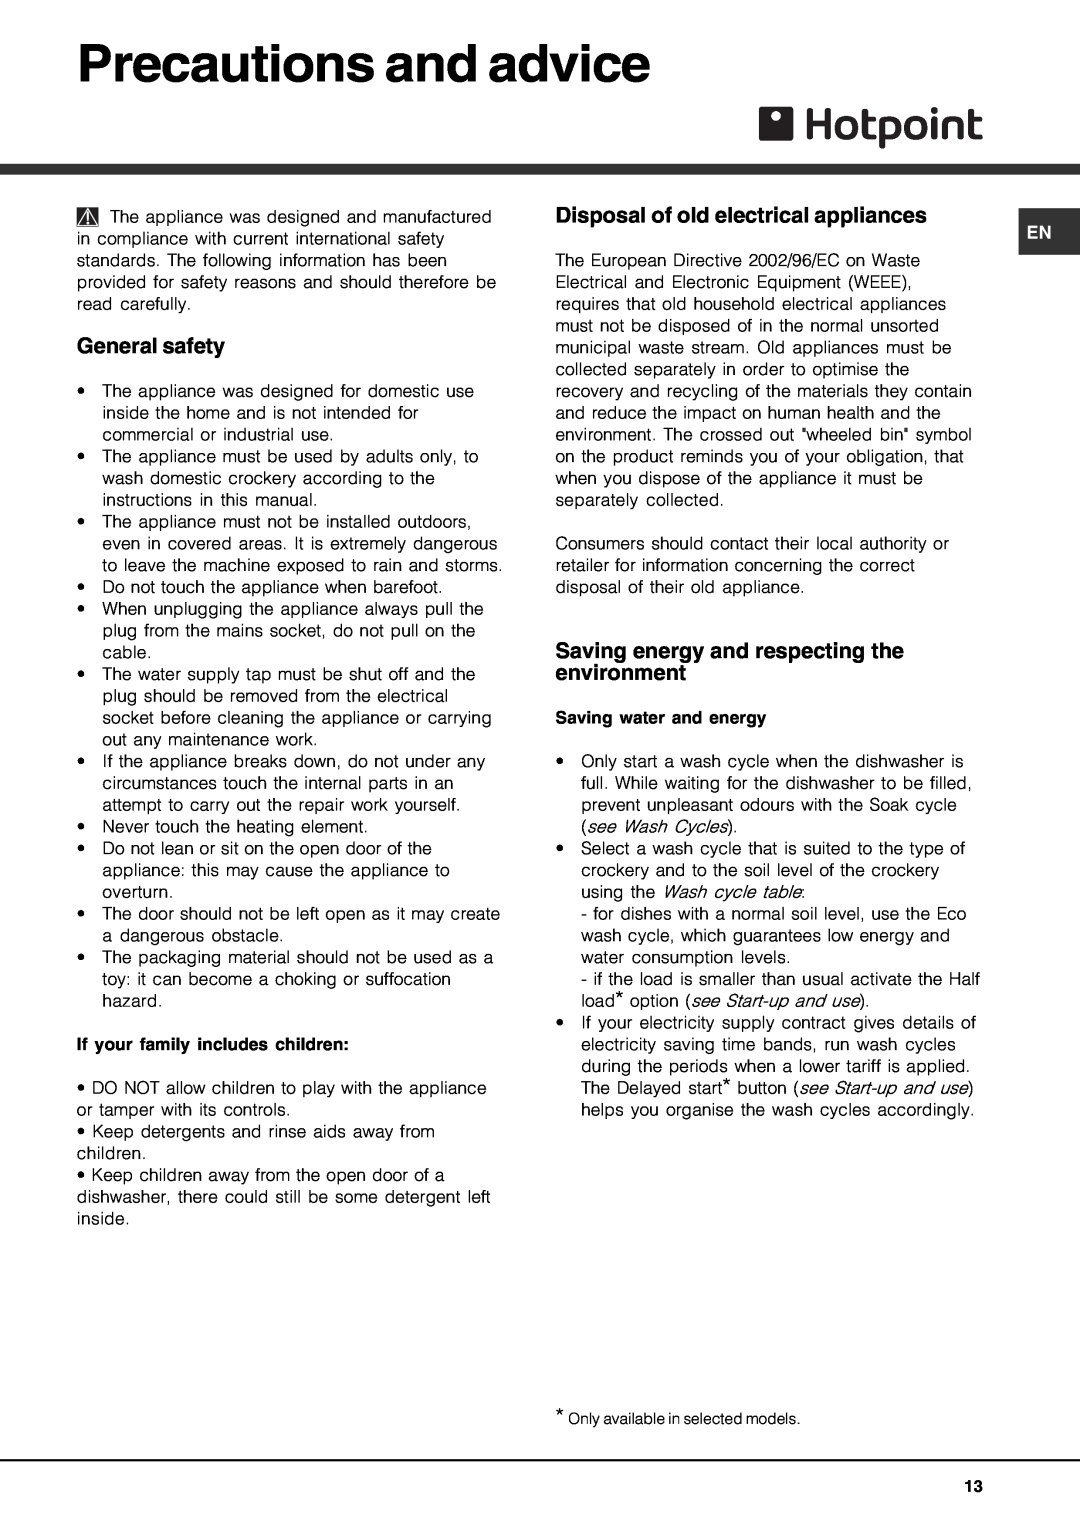 Hotpoint FDM 550 manual Precautions and advice, General safety, Disposal of old electrical appliances 